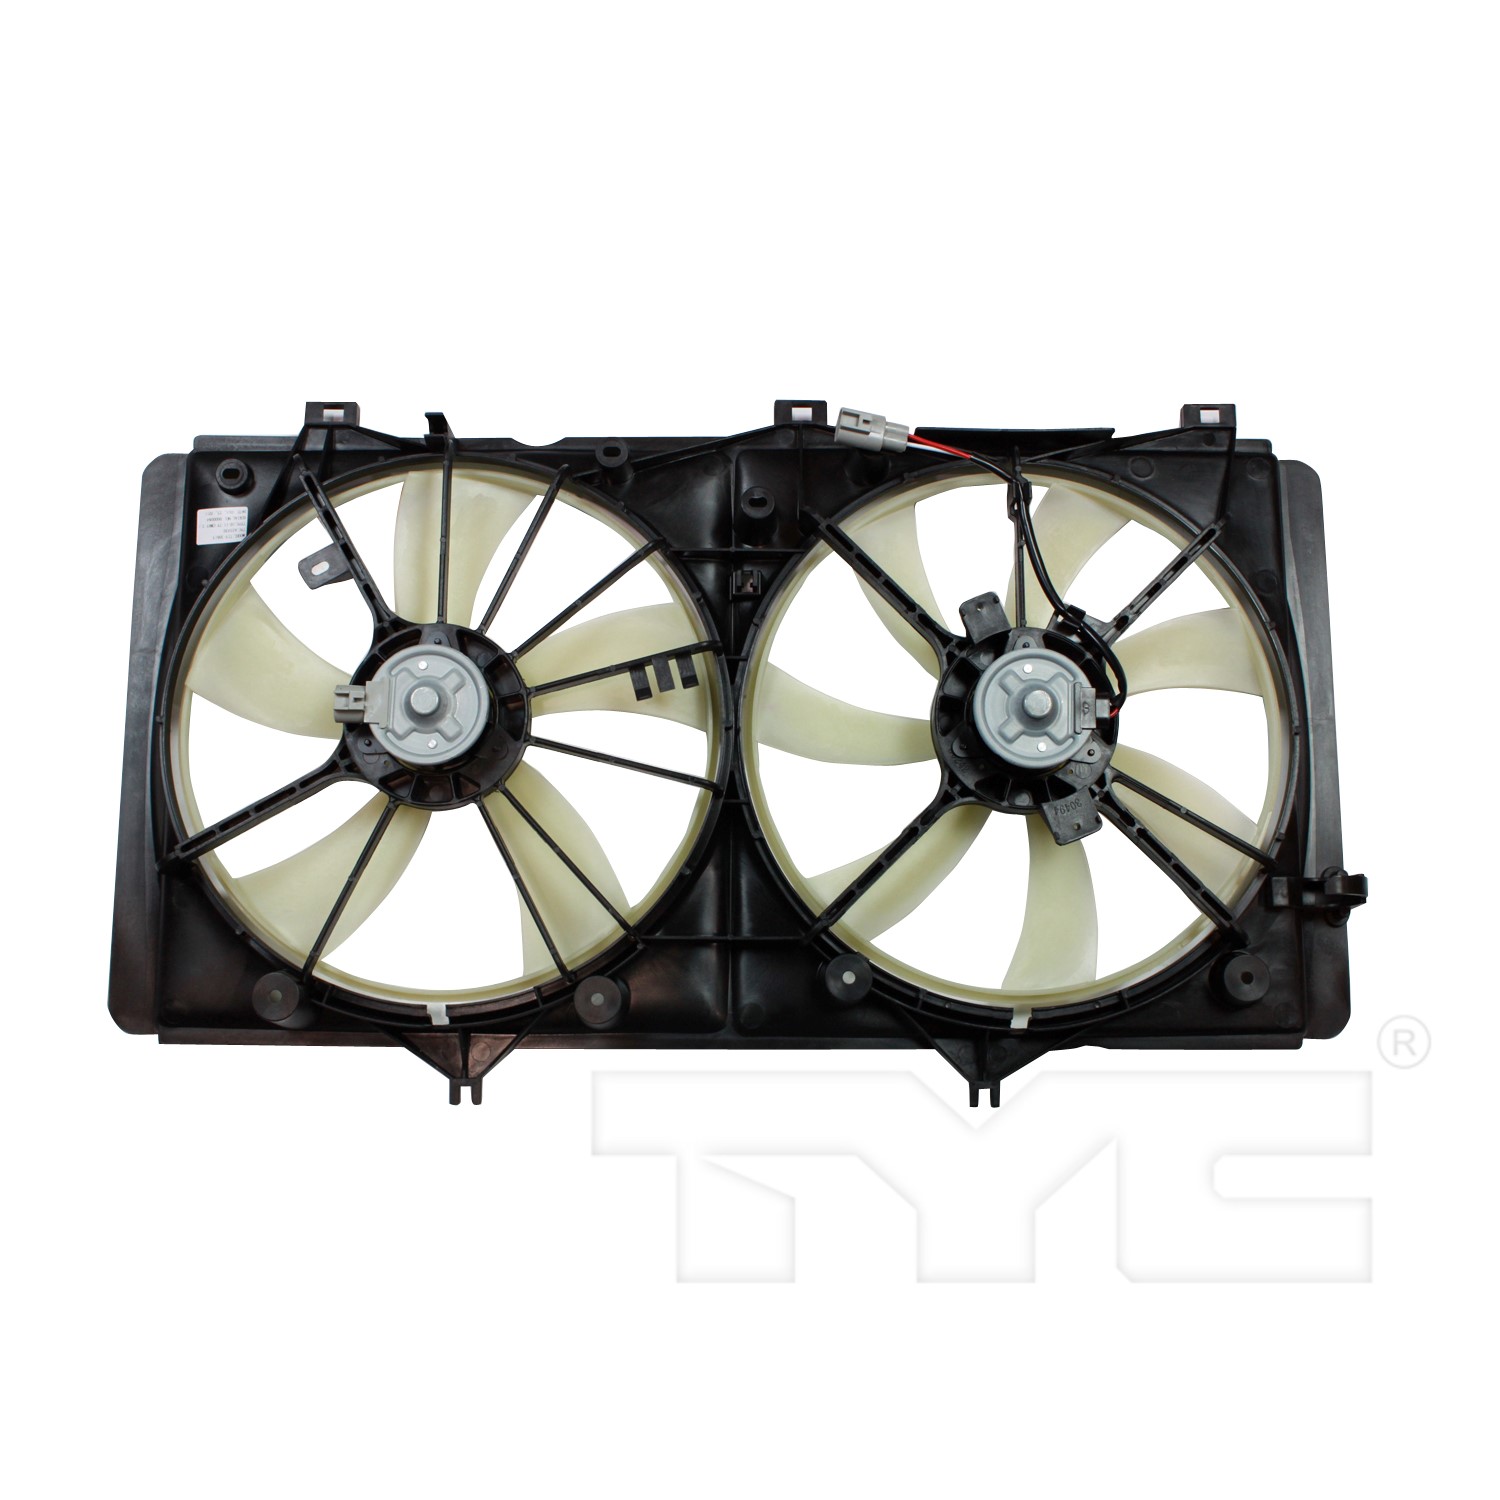 Aftermarket FAN ASSEMBLY/FAN SHROUDS for TOYOTA - CAMRY, CAMRY,10-11,Radiator cooling fan assy